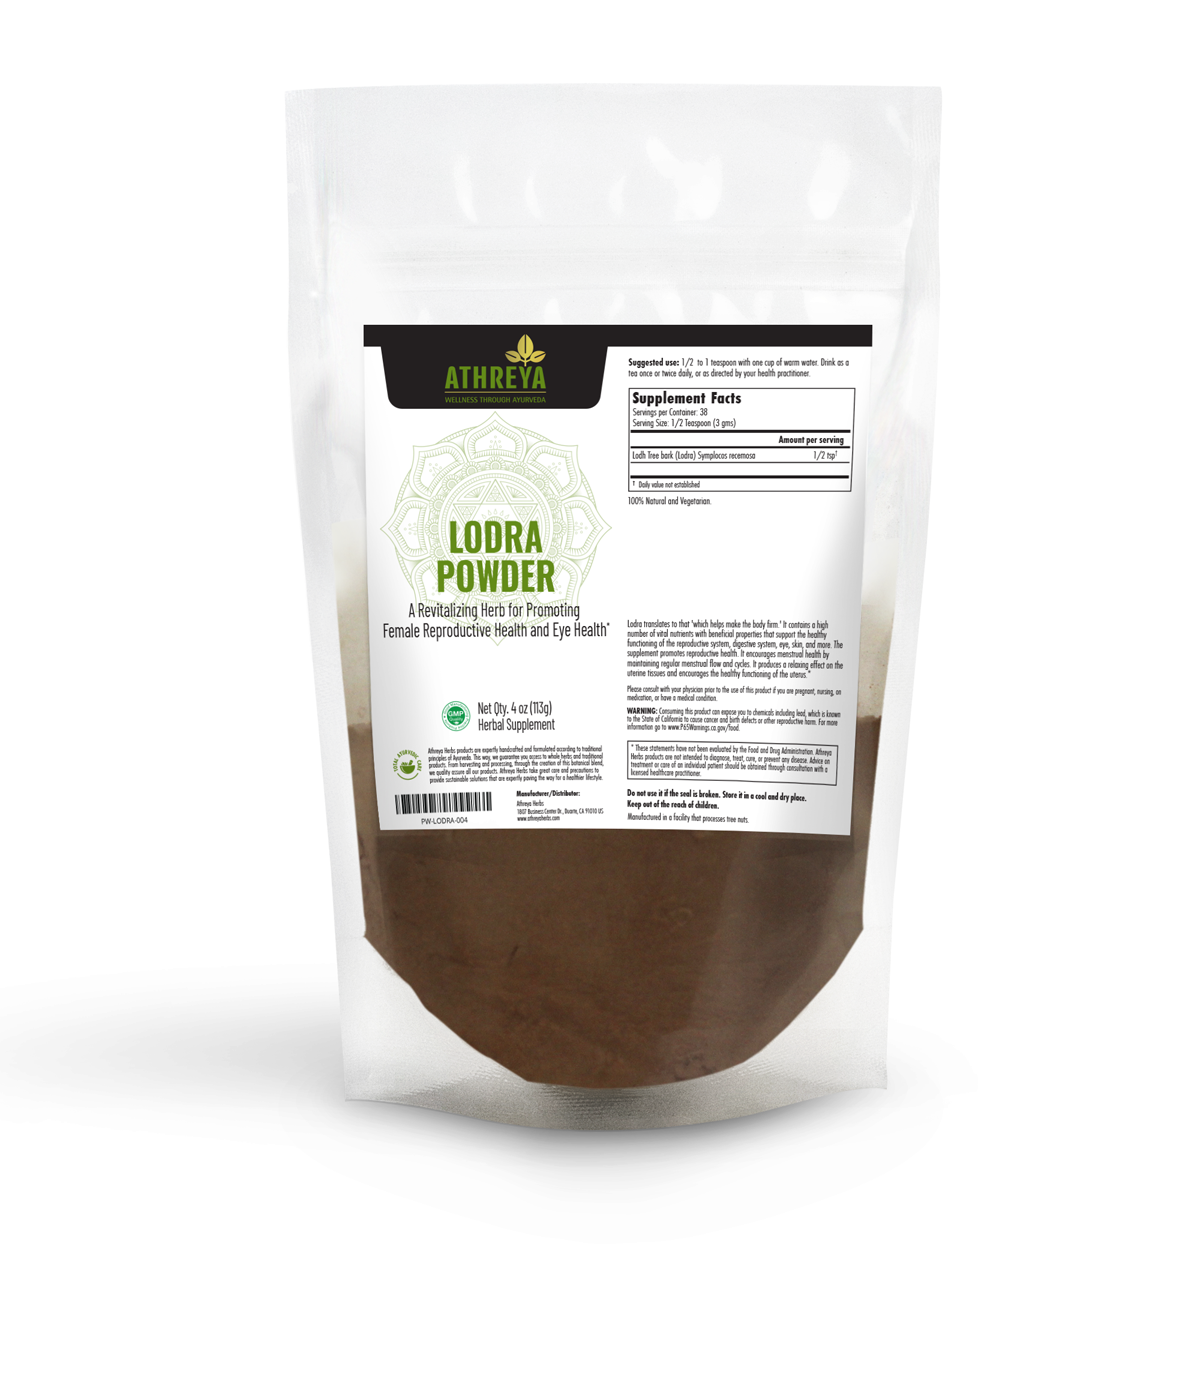 Lodra Powder | Ayurvedic Supplement for Promoting Reproductive Health ...